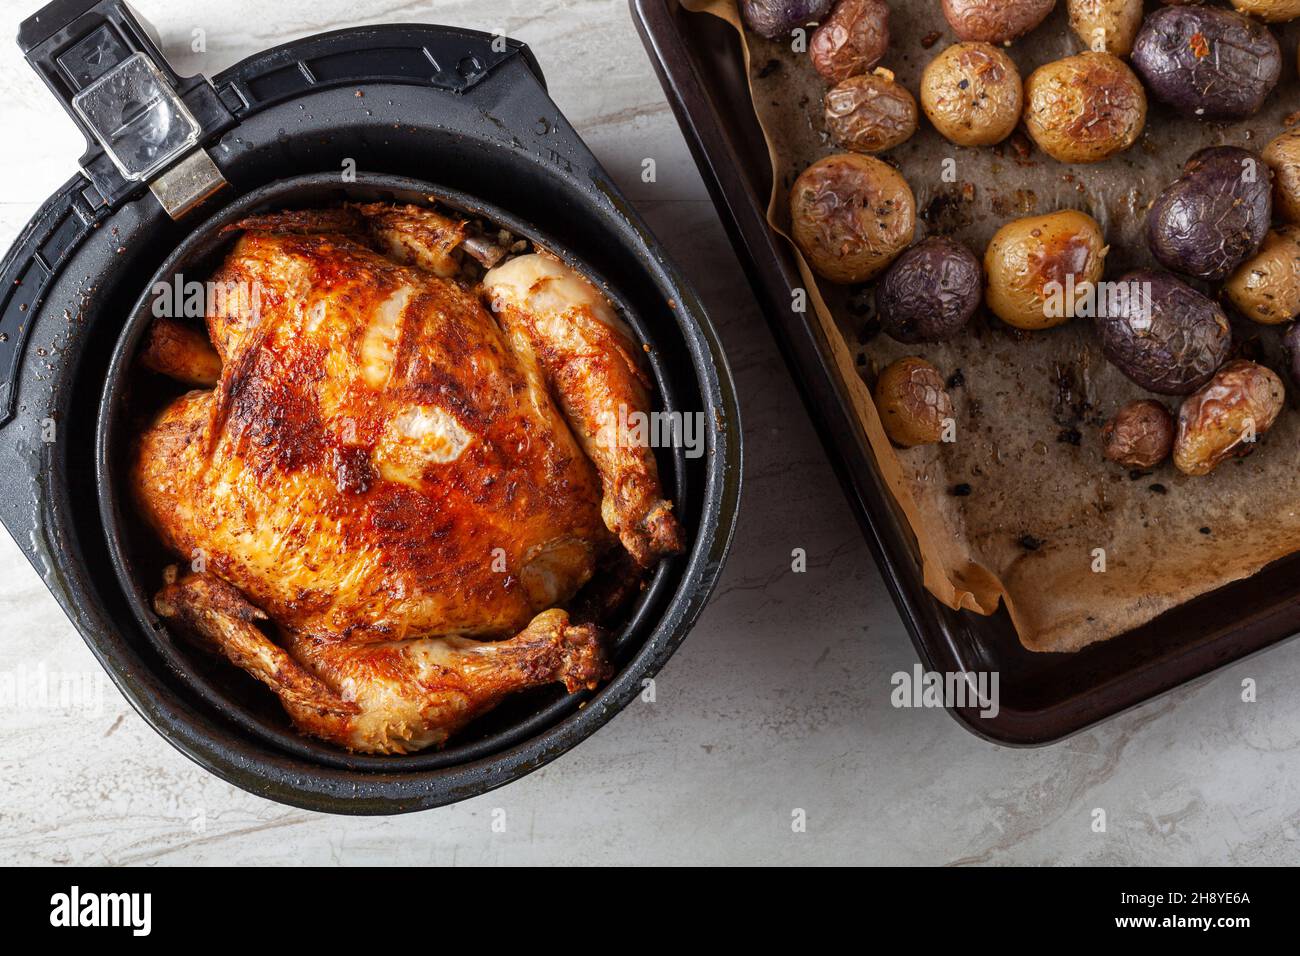 A whole chicken cooked inside an air frier concept. A healthy nutritious homemade alternative to deep fried store bought meat. Served inside the fryer Stock Photo